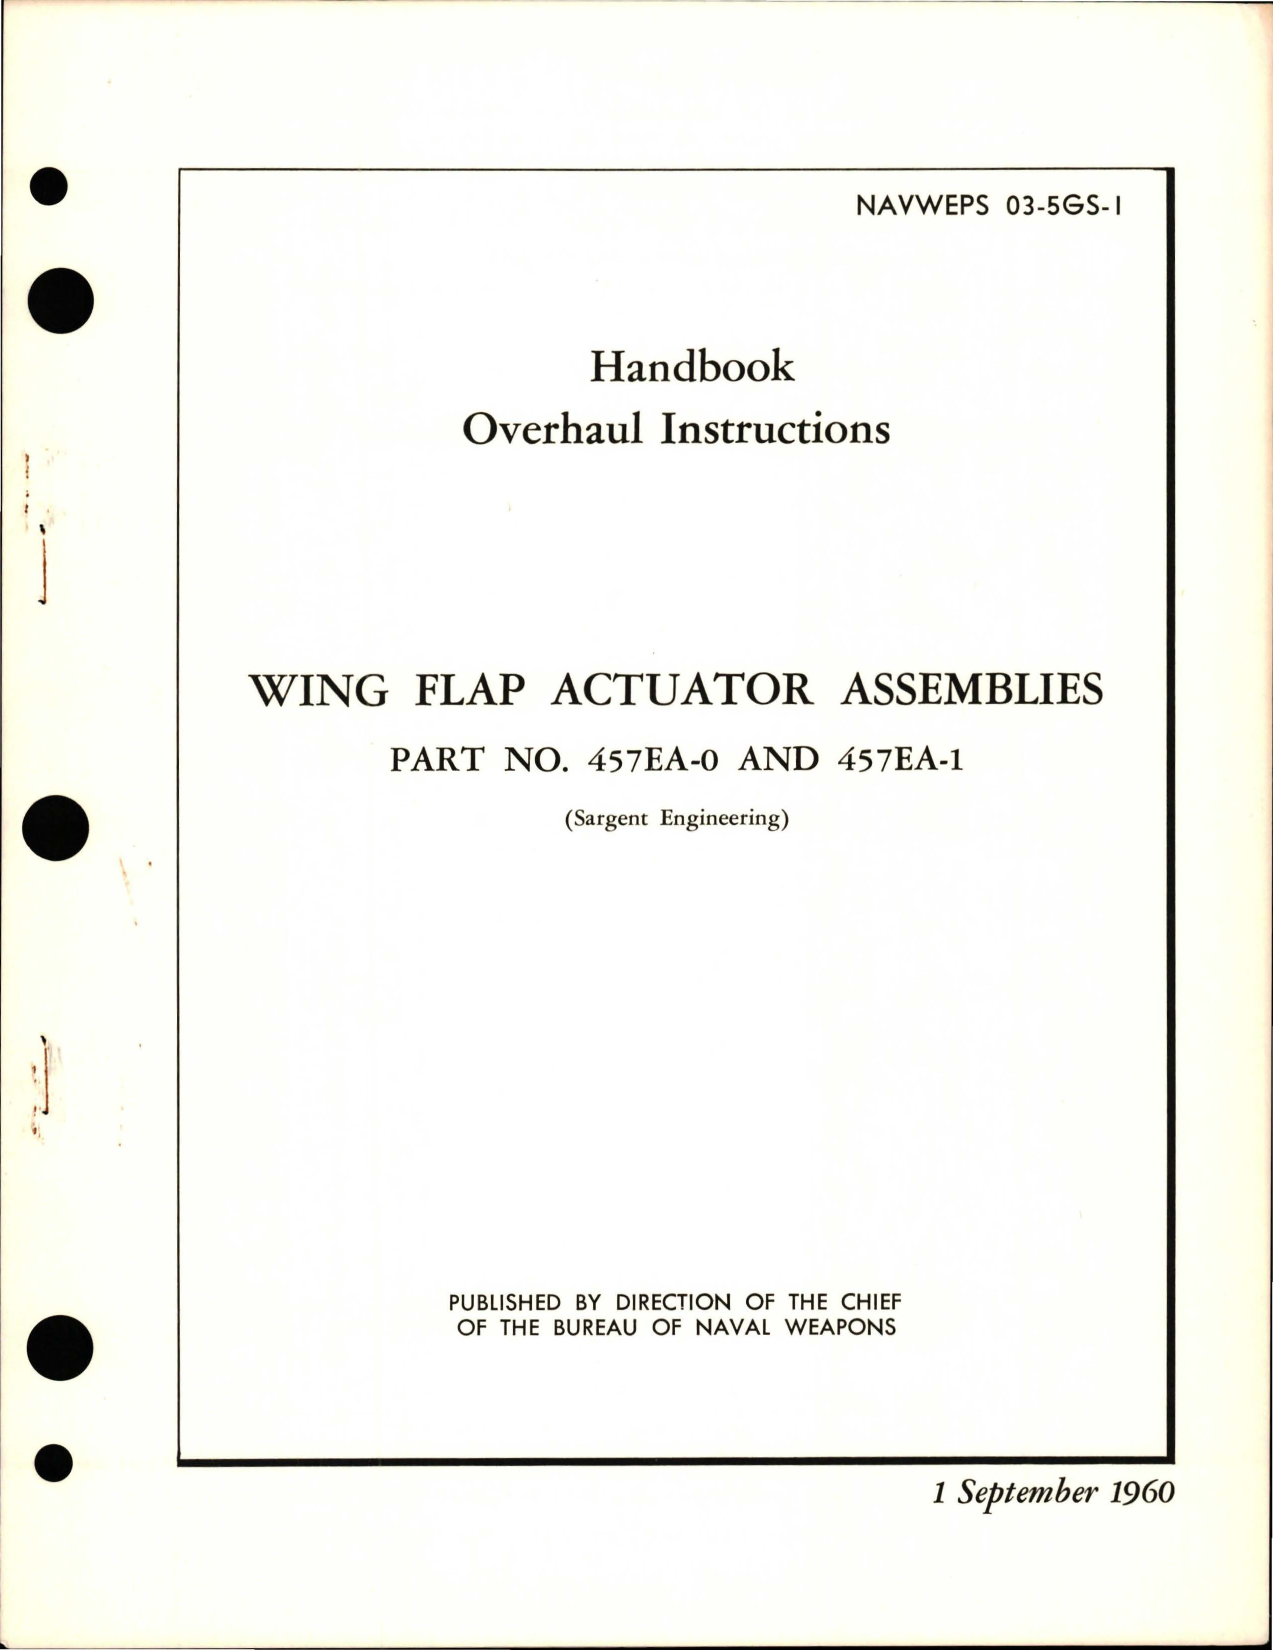 Sample page 1 from AirCorps Library document: Overhaul Instructions for Wing Flap Actuator Assembly - Parts 457EA-0 and 457EA-1